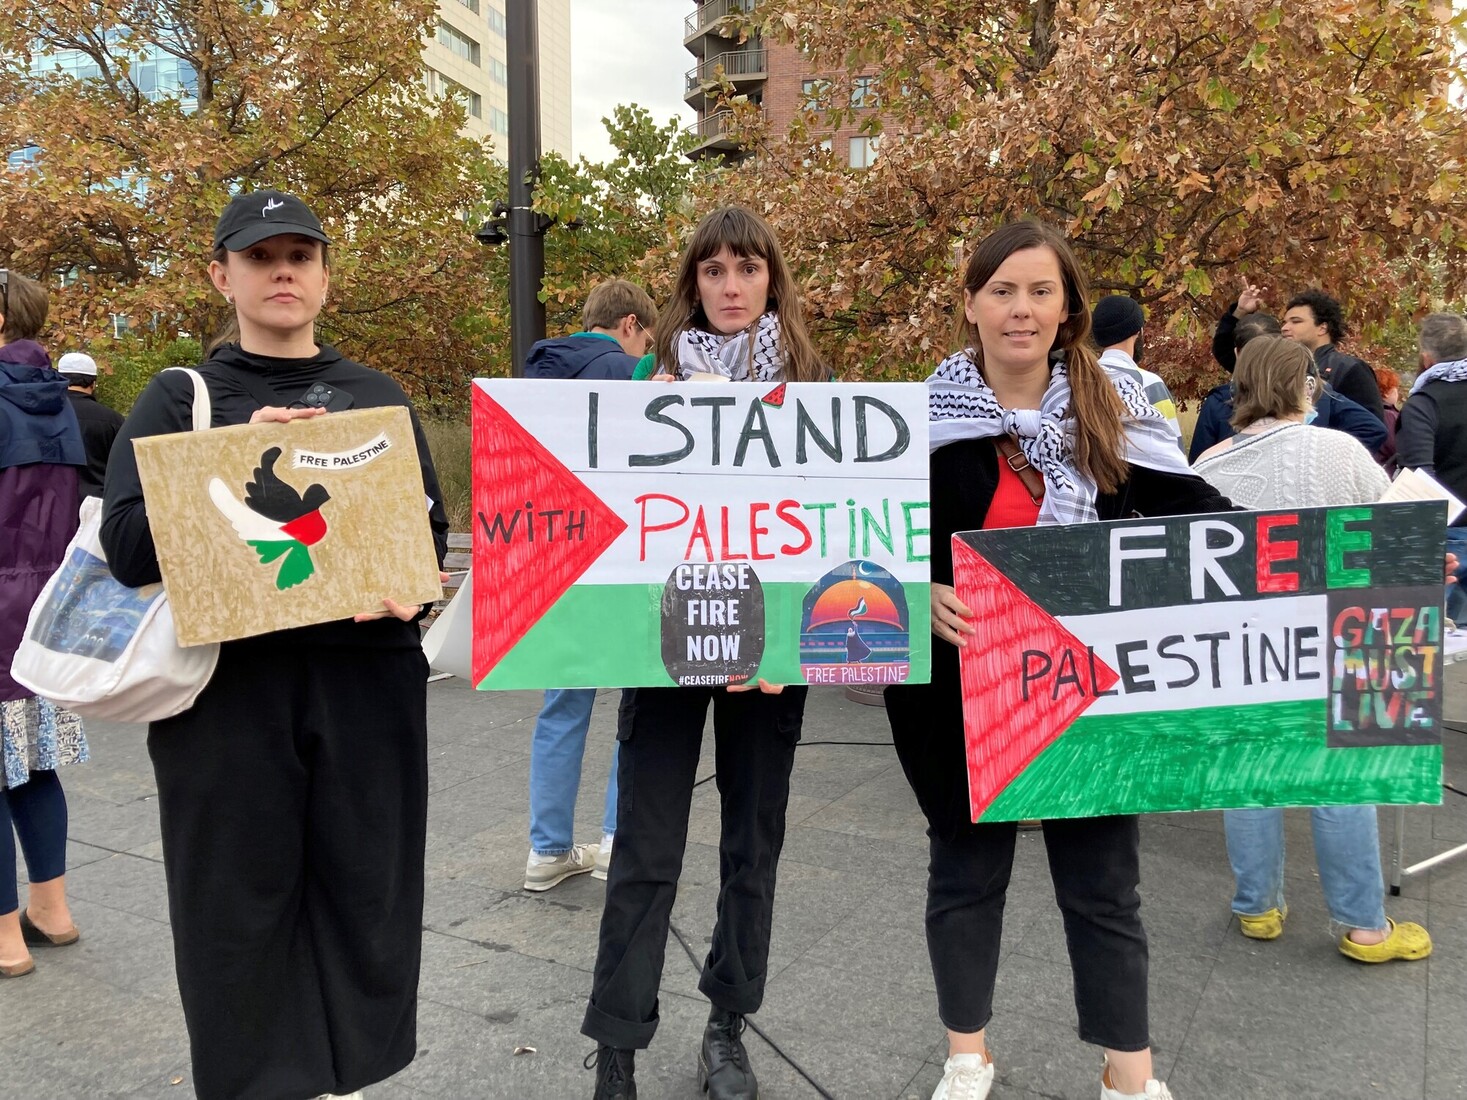 3 people holding palestine signs